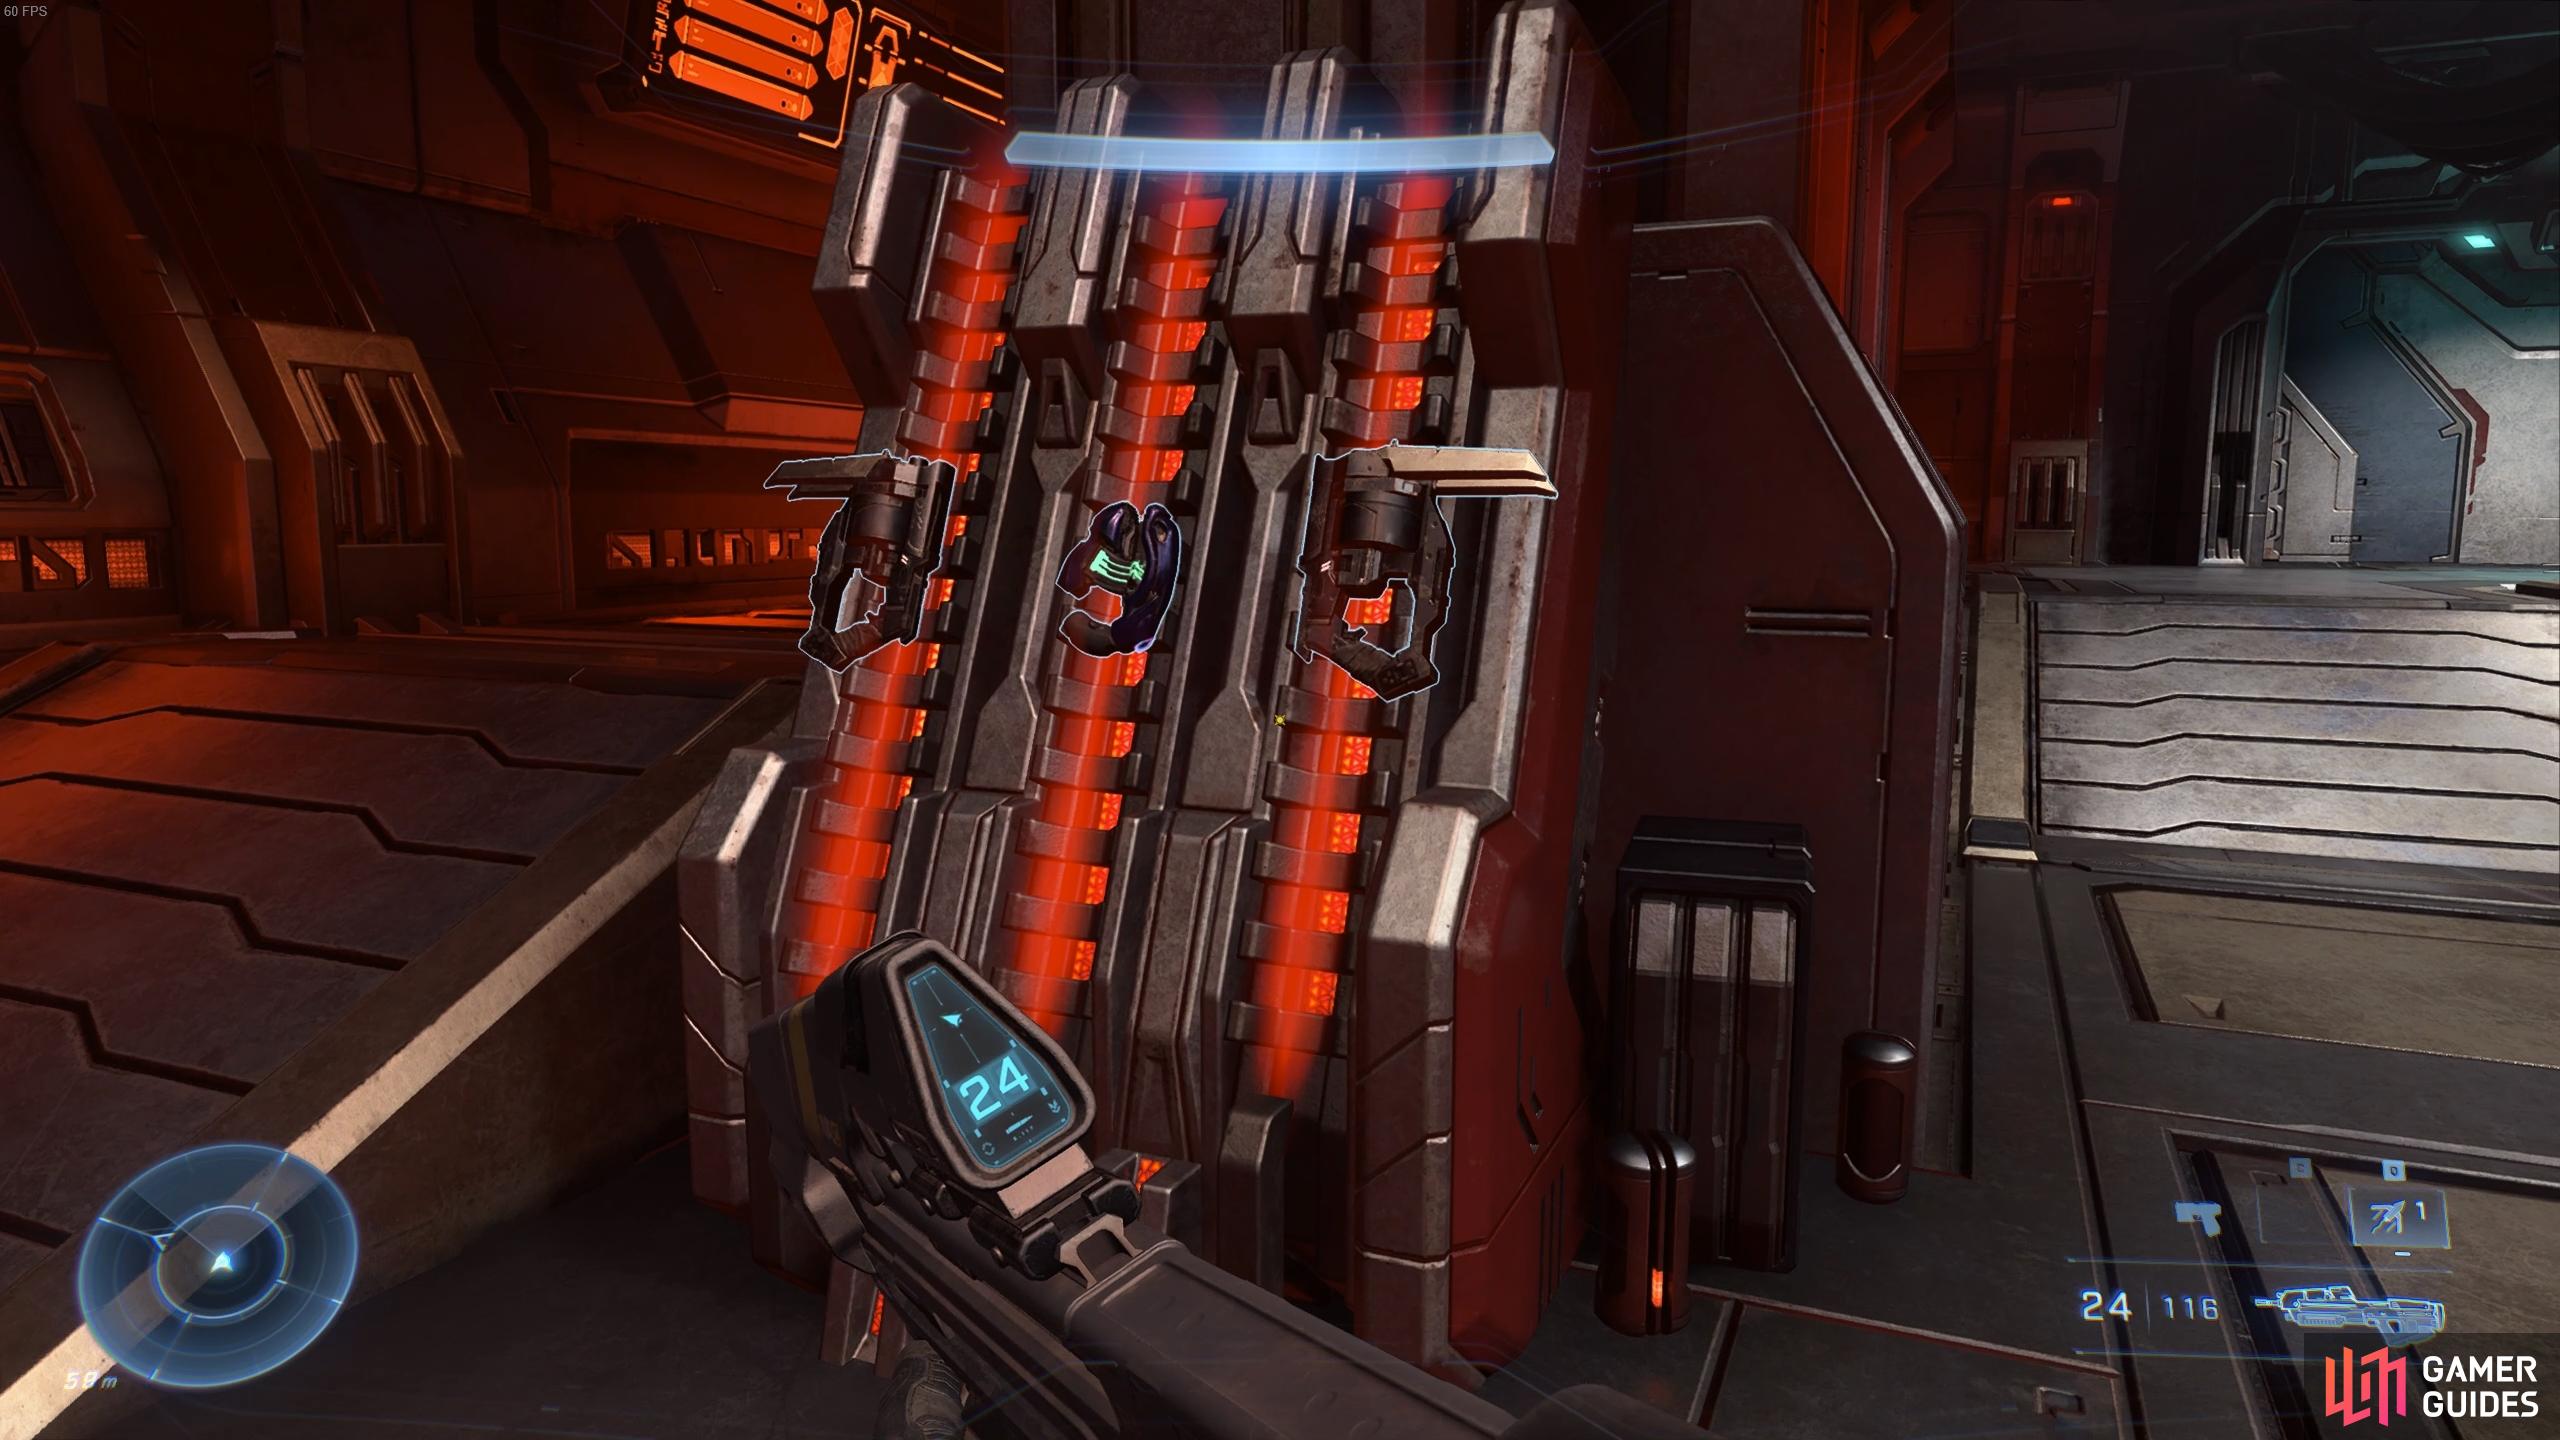 You'll find plenty of weapon racks with different types of weapons if you run out of ammunition.